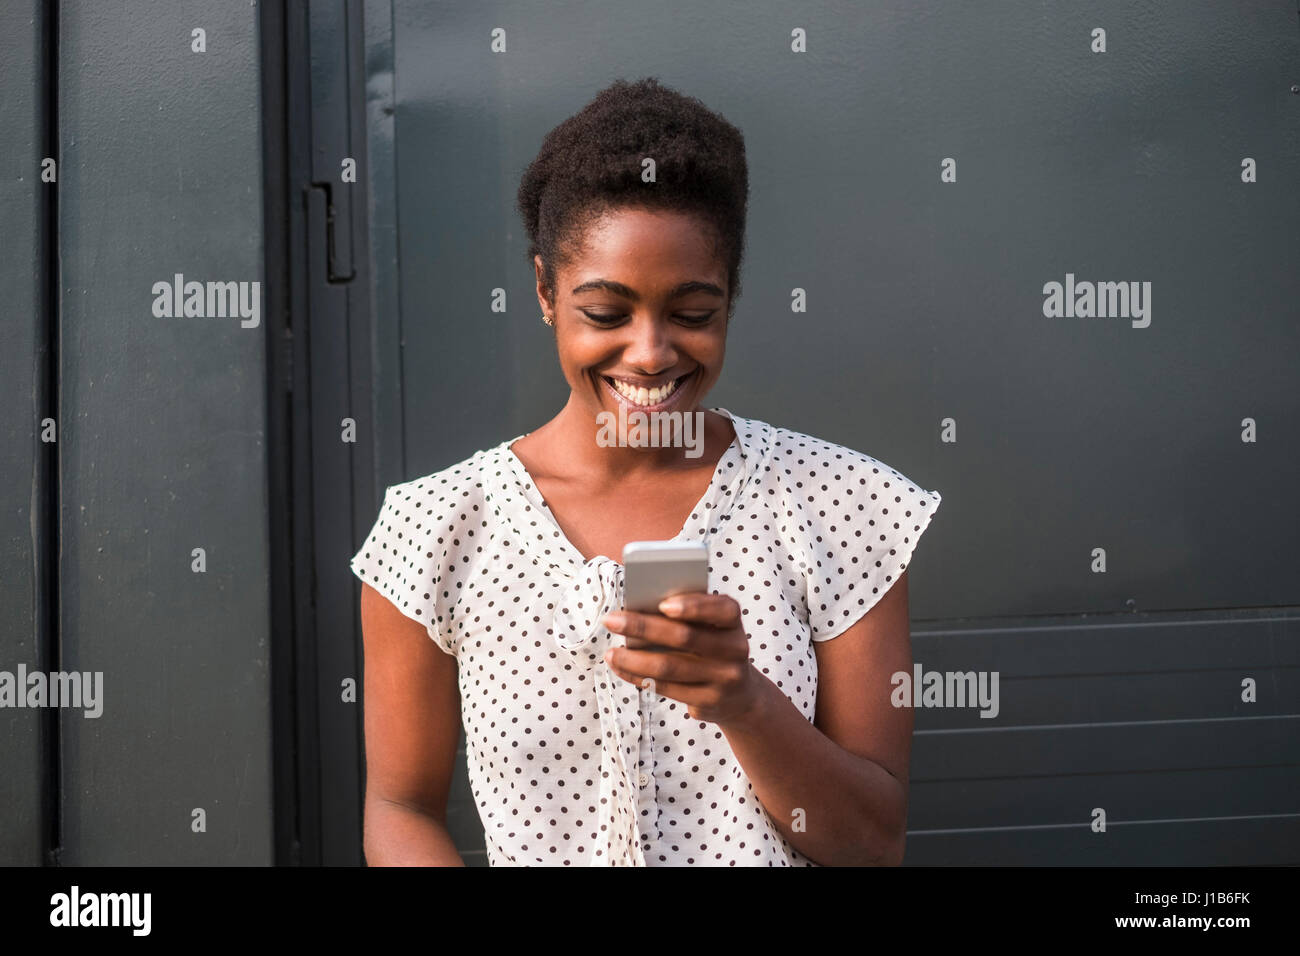 Smiling African American woman texting on cell phone Stock Photo